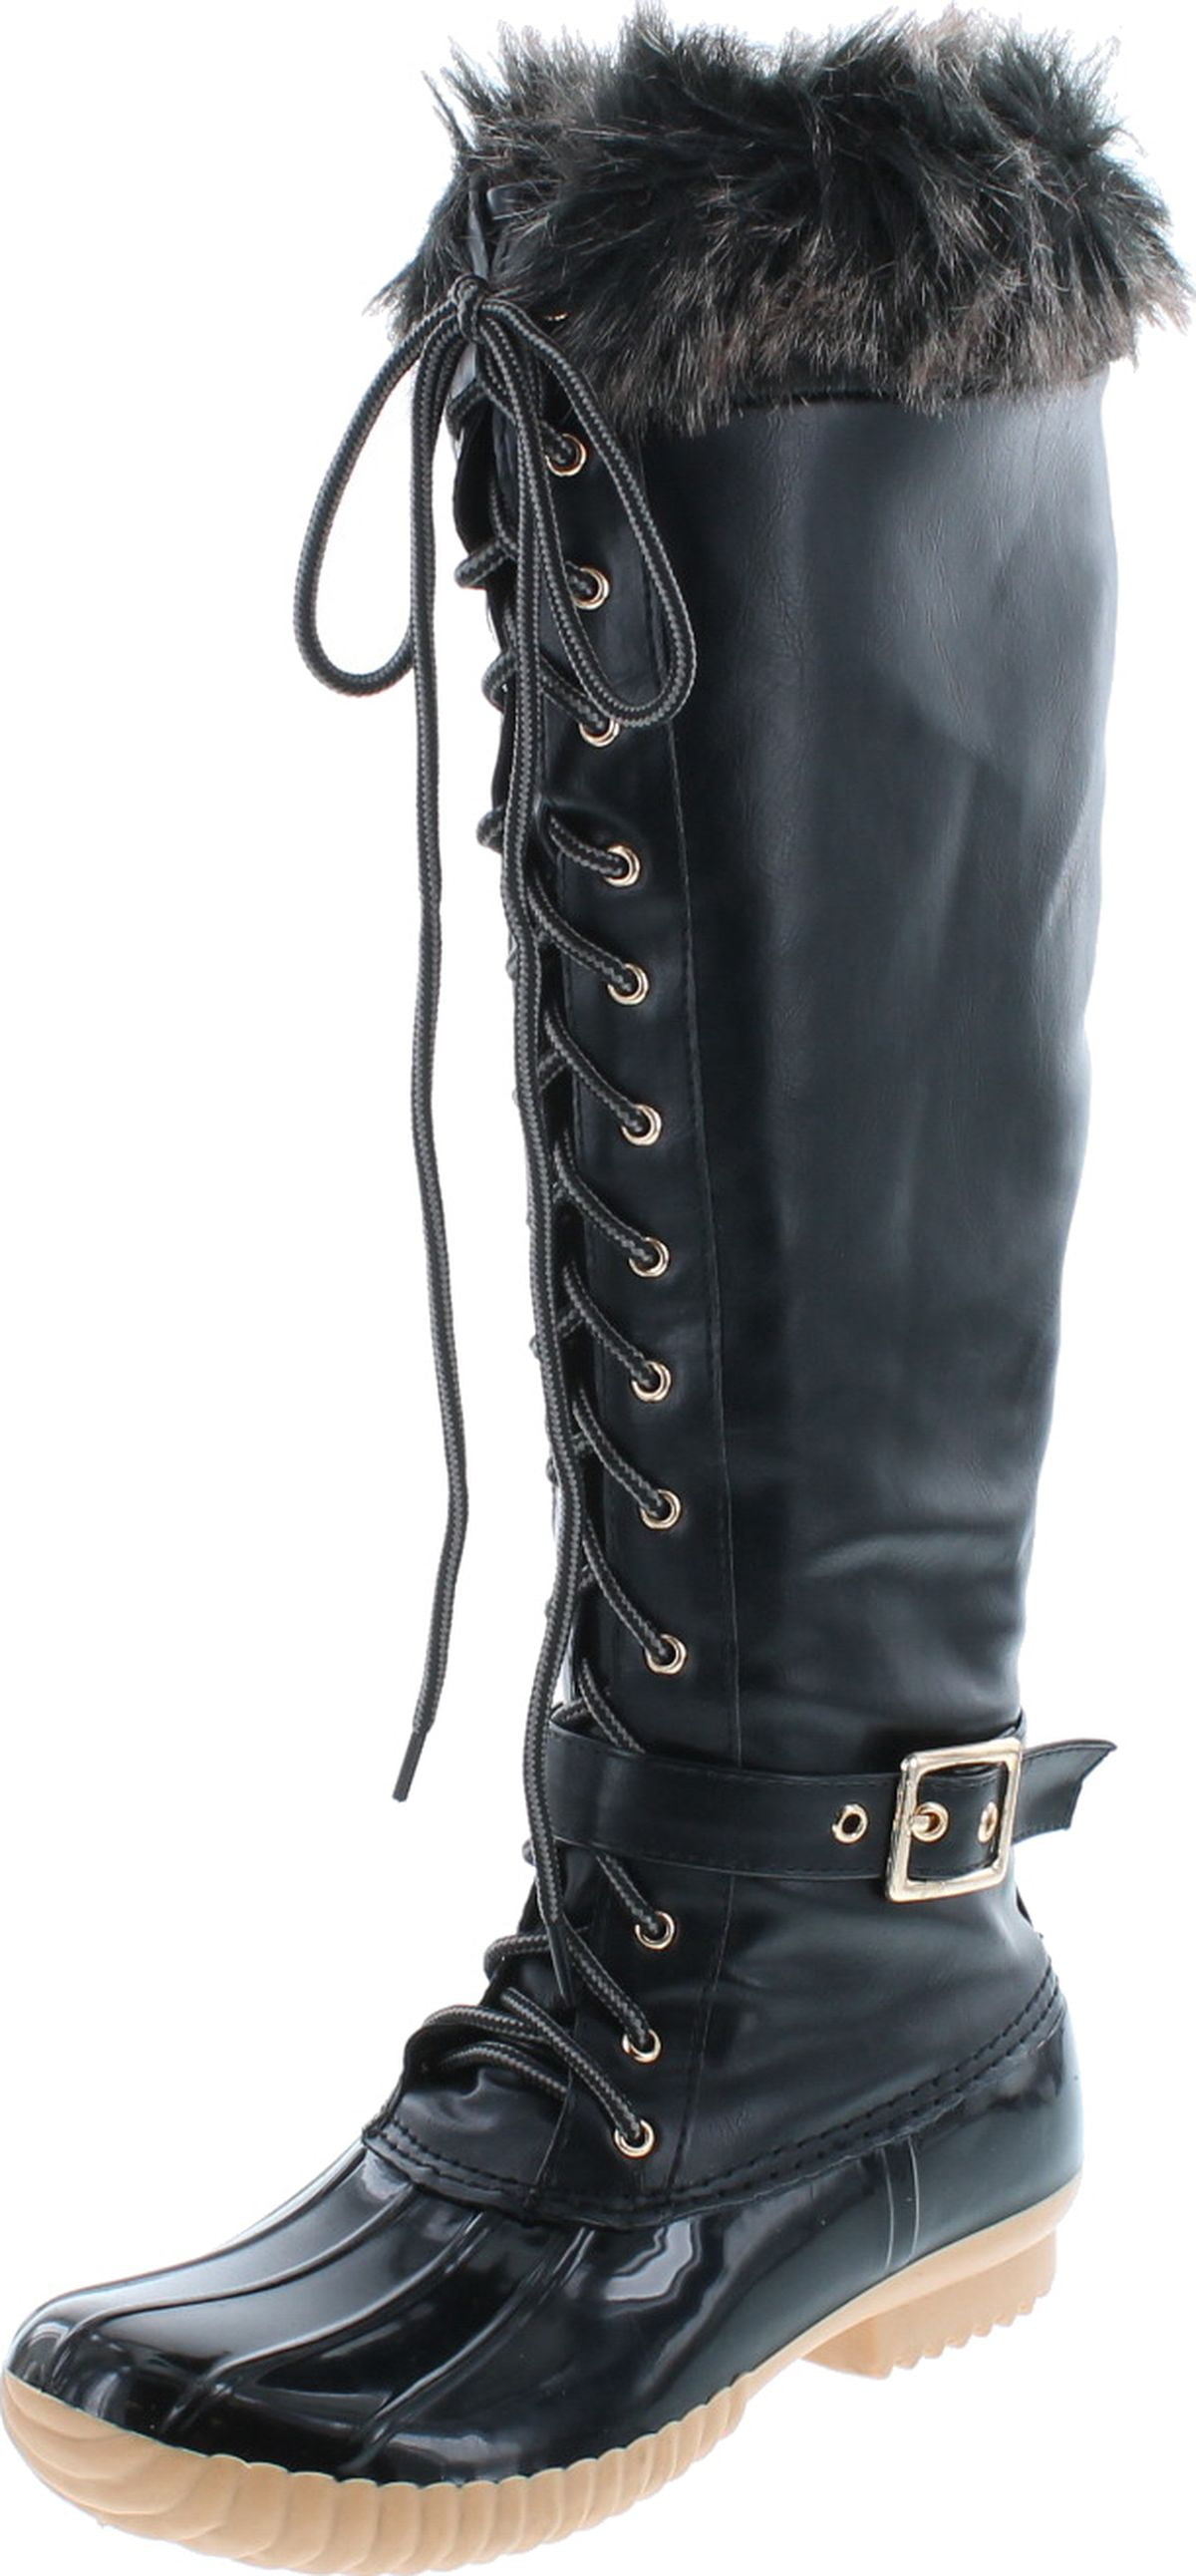 insulated knee high boots